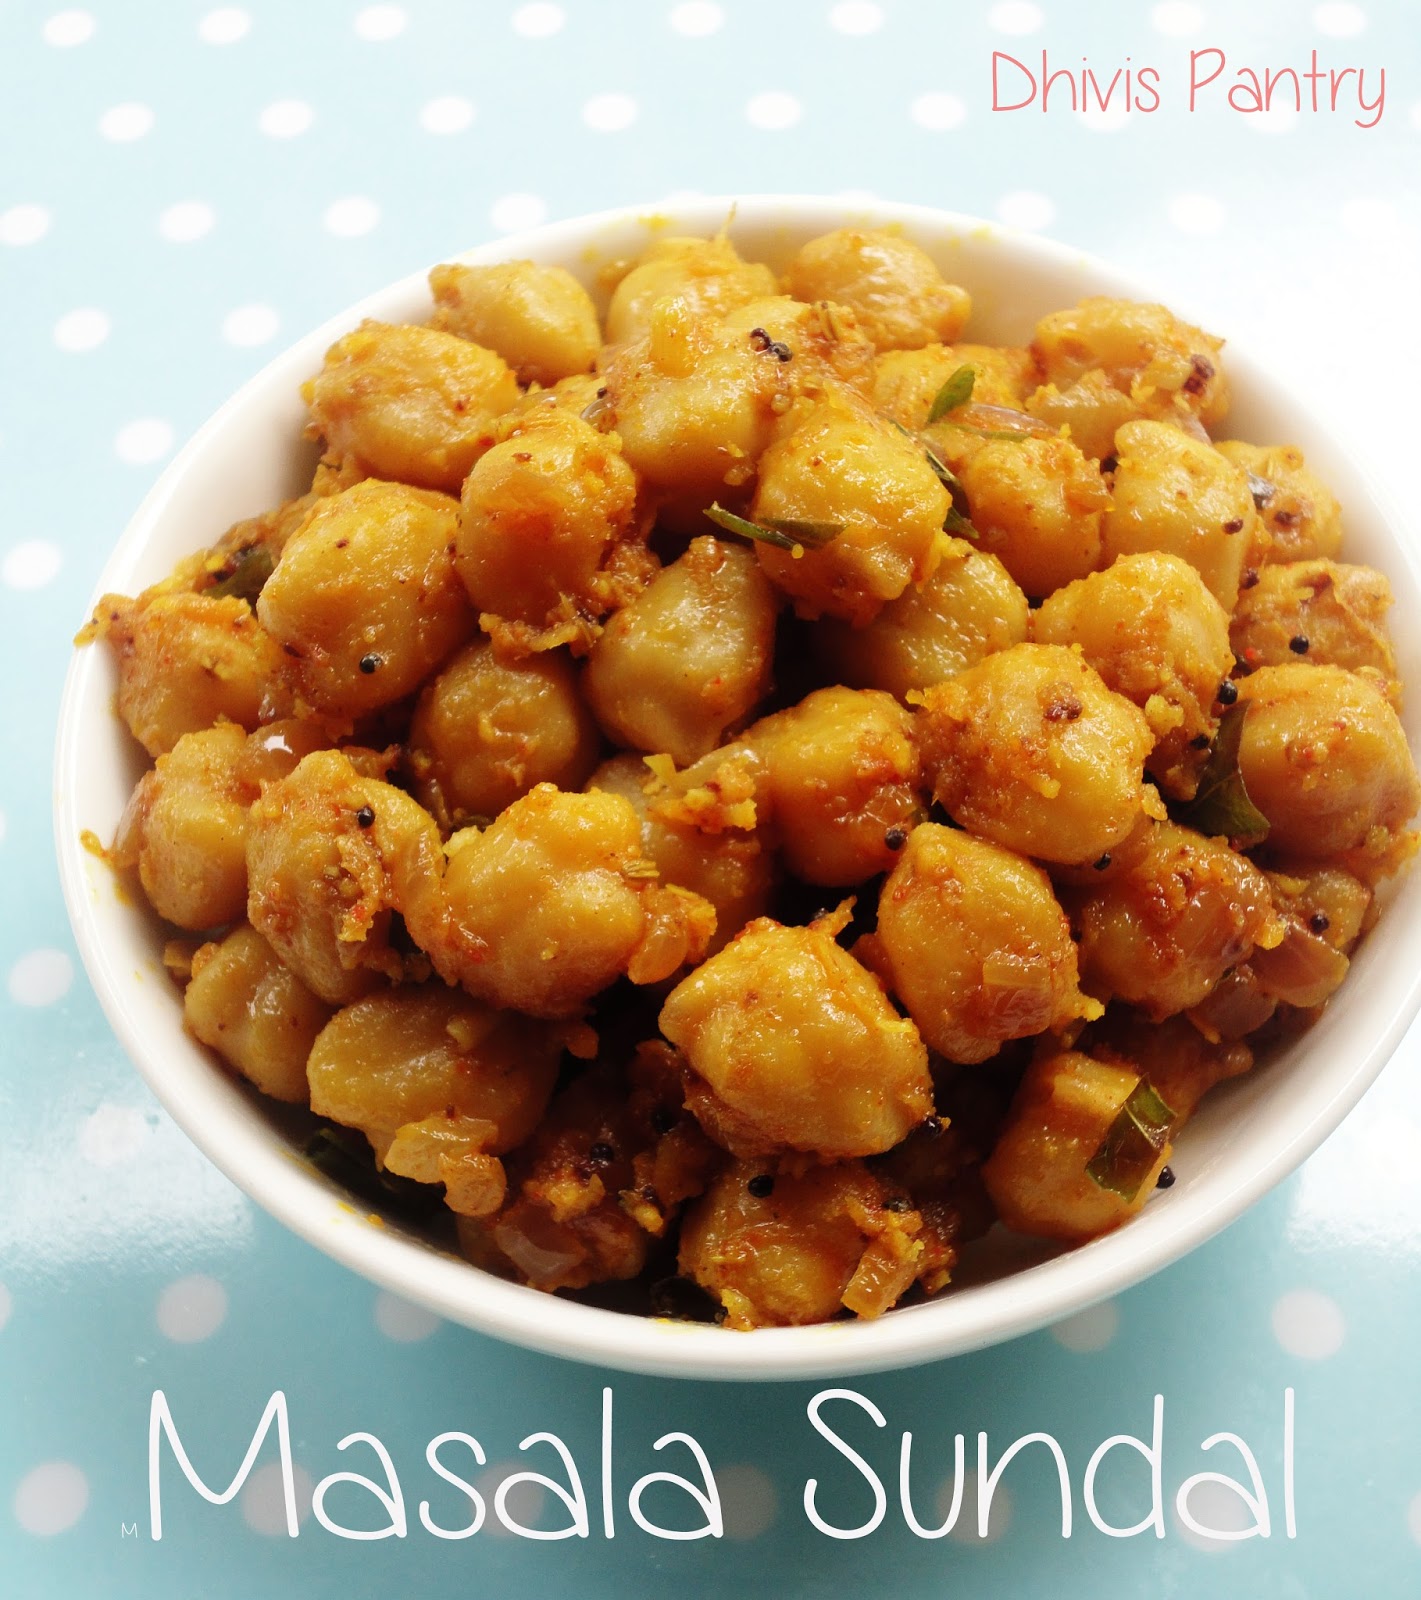 Come To Dhivi's Pantry: Masala Sundal